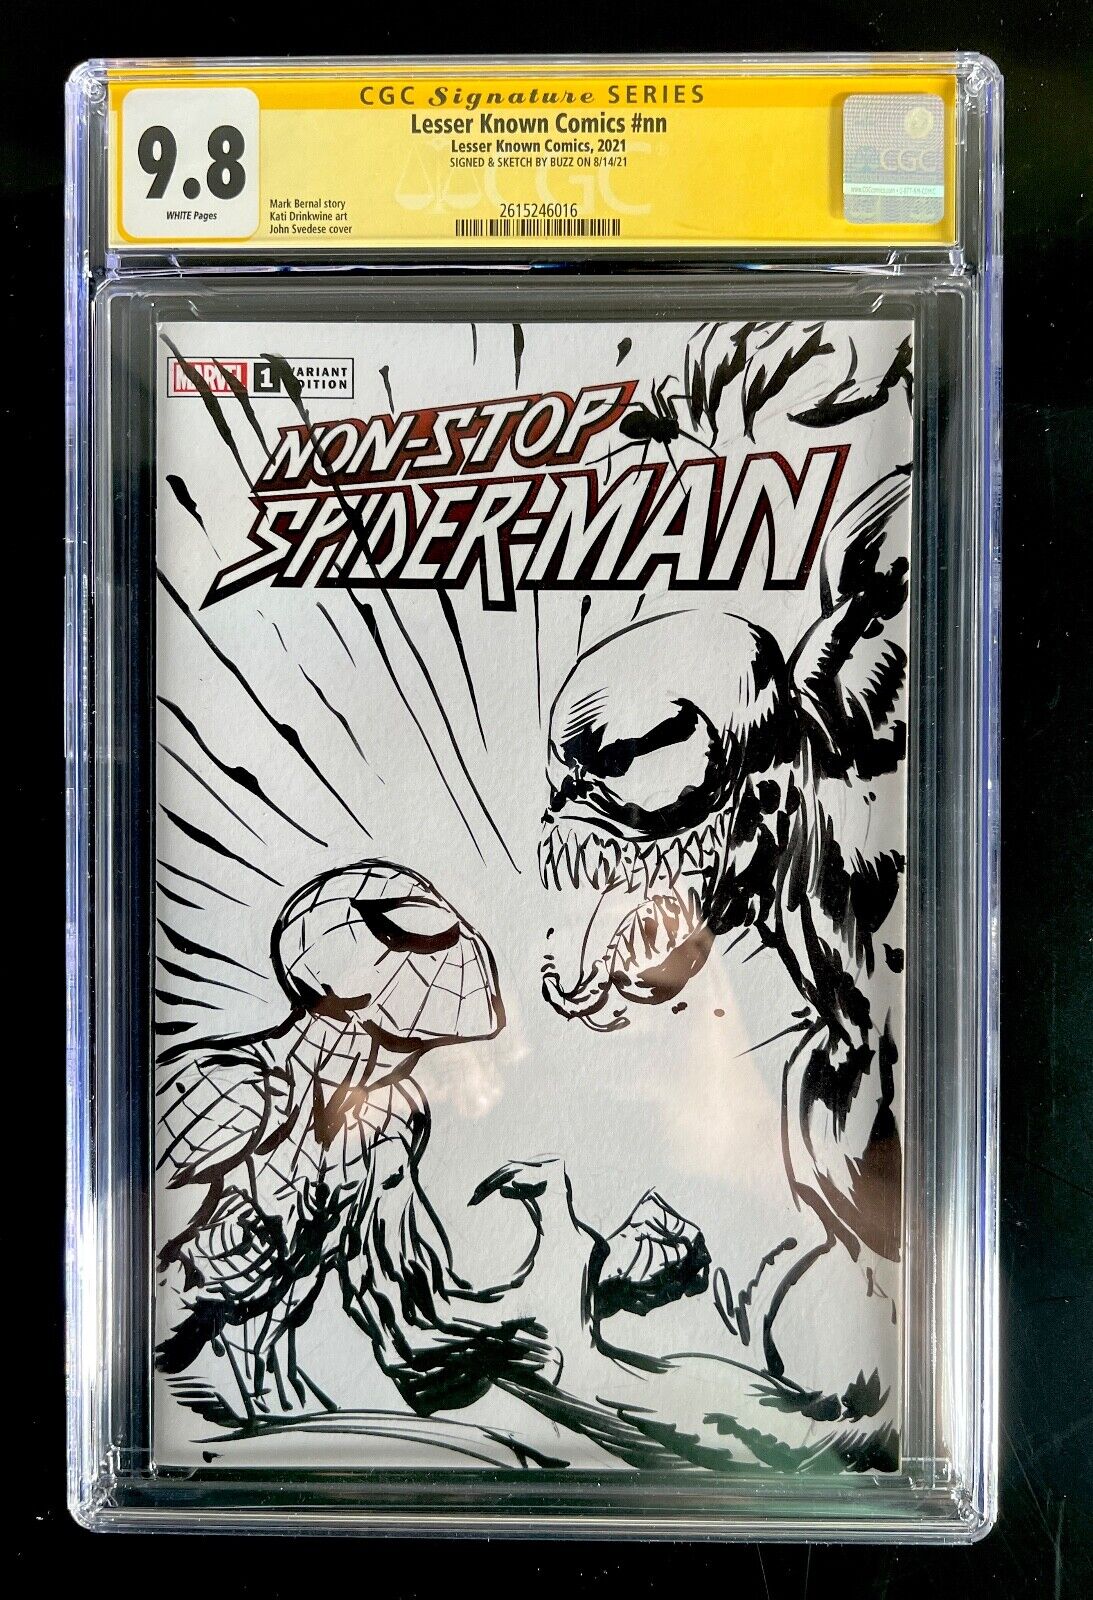 Non-Stop Spider-Man #1 - Blank Cover - CGC Signed & Sketched BUZZ 9.8